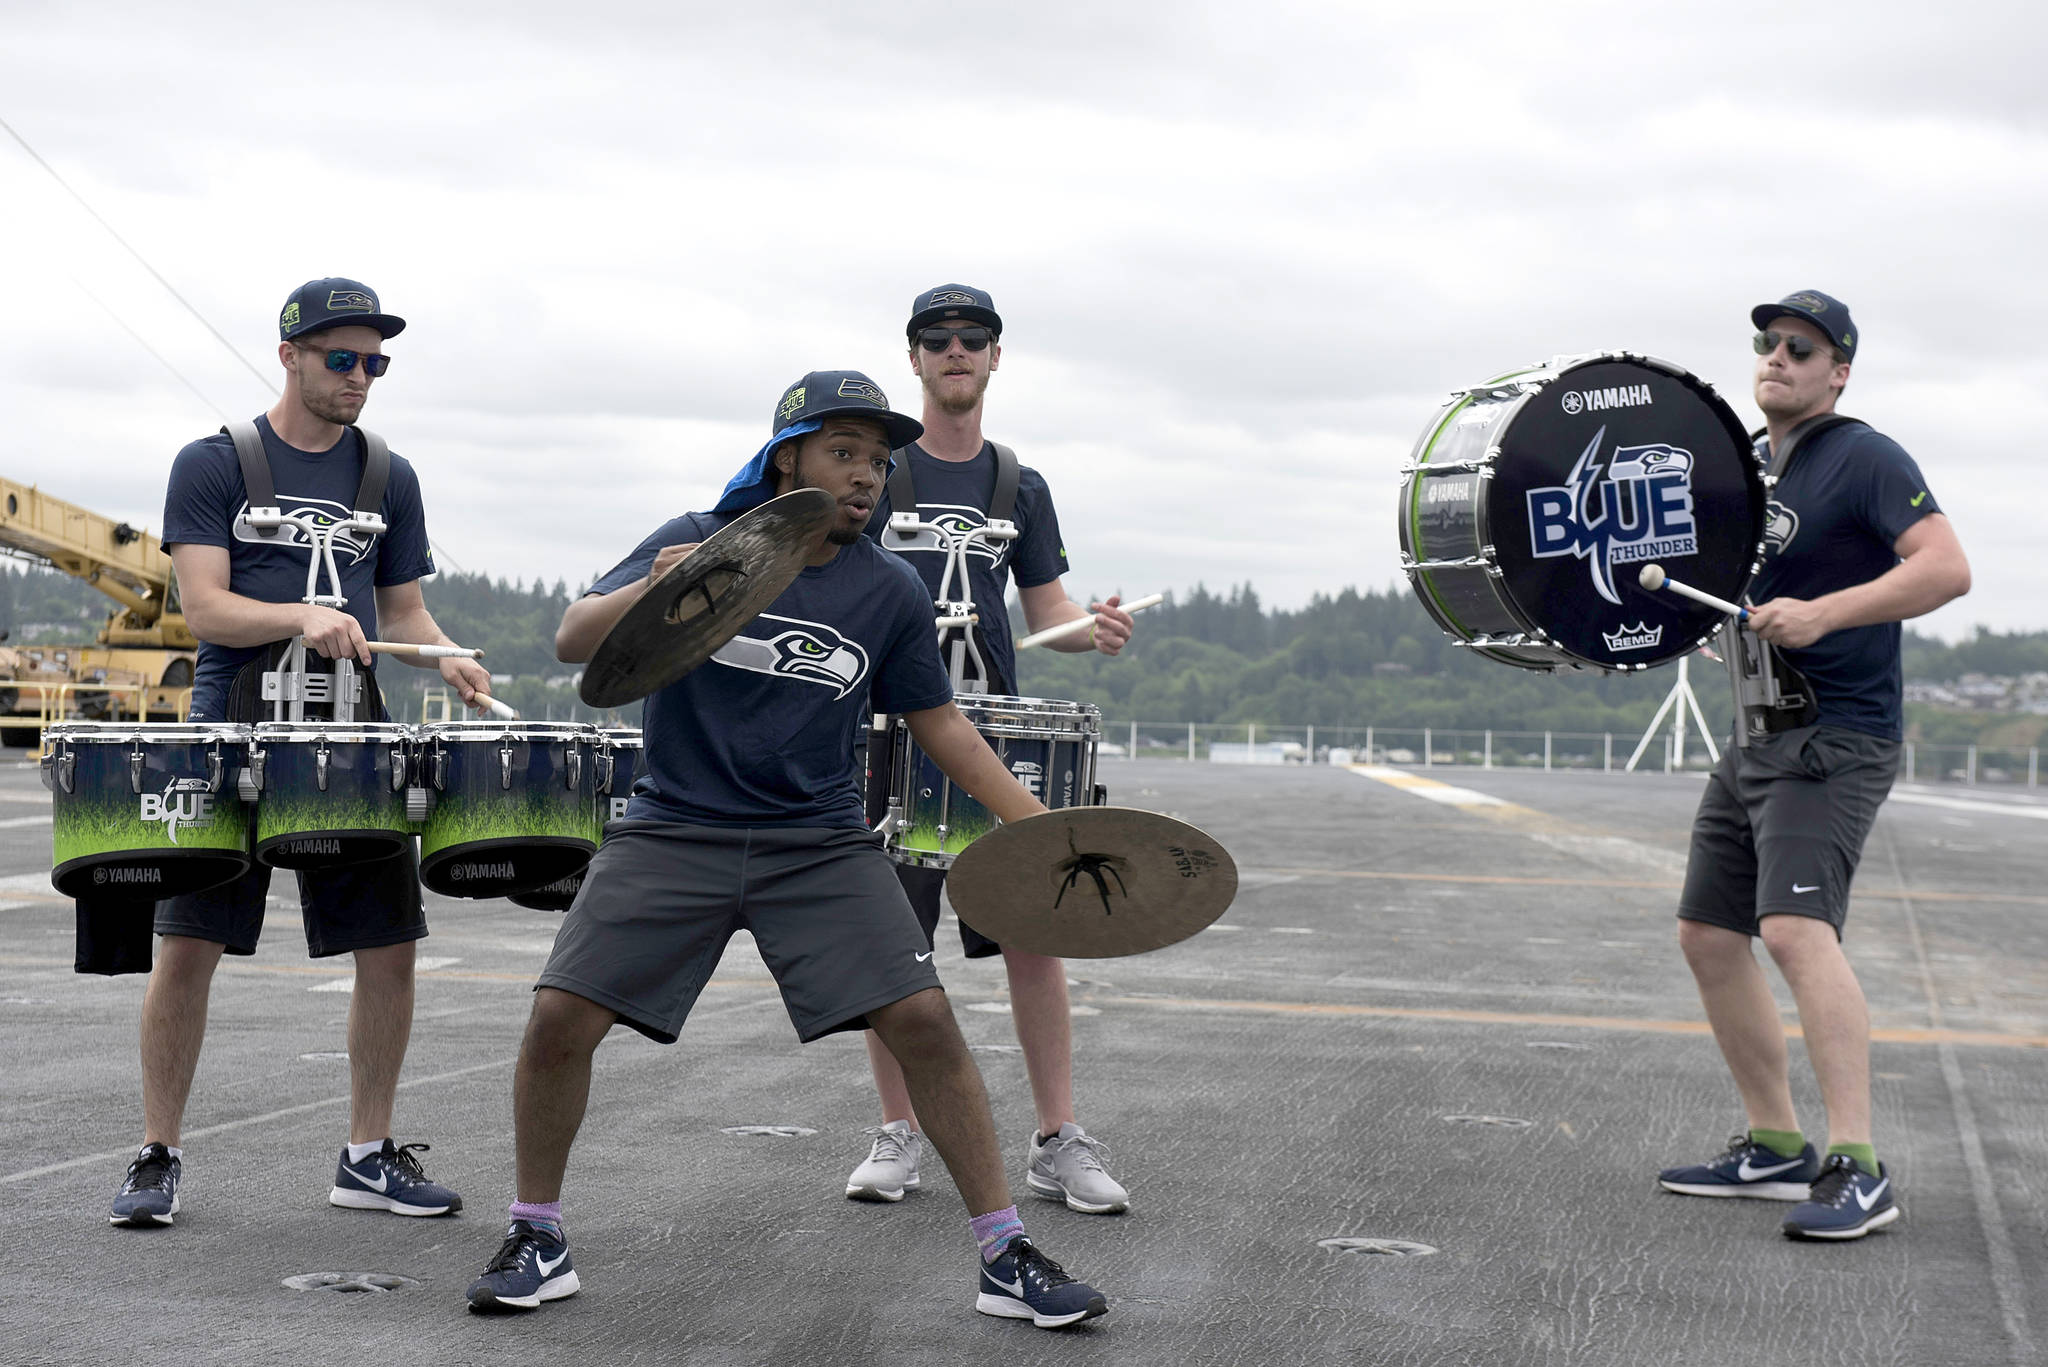 The Seattle Seahawks drumline, Blue Thunder, performs aboard the aircraft carrier USS John C. Stennis (CVN 74). The Seattle Seahawks football team and Sea Gals cheerleaders held a military appreciation event aboard to meet and talk with sailors.                                Mass Communications Specialist Seaman Angelina Grimsley / U.S. Navy